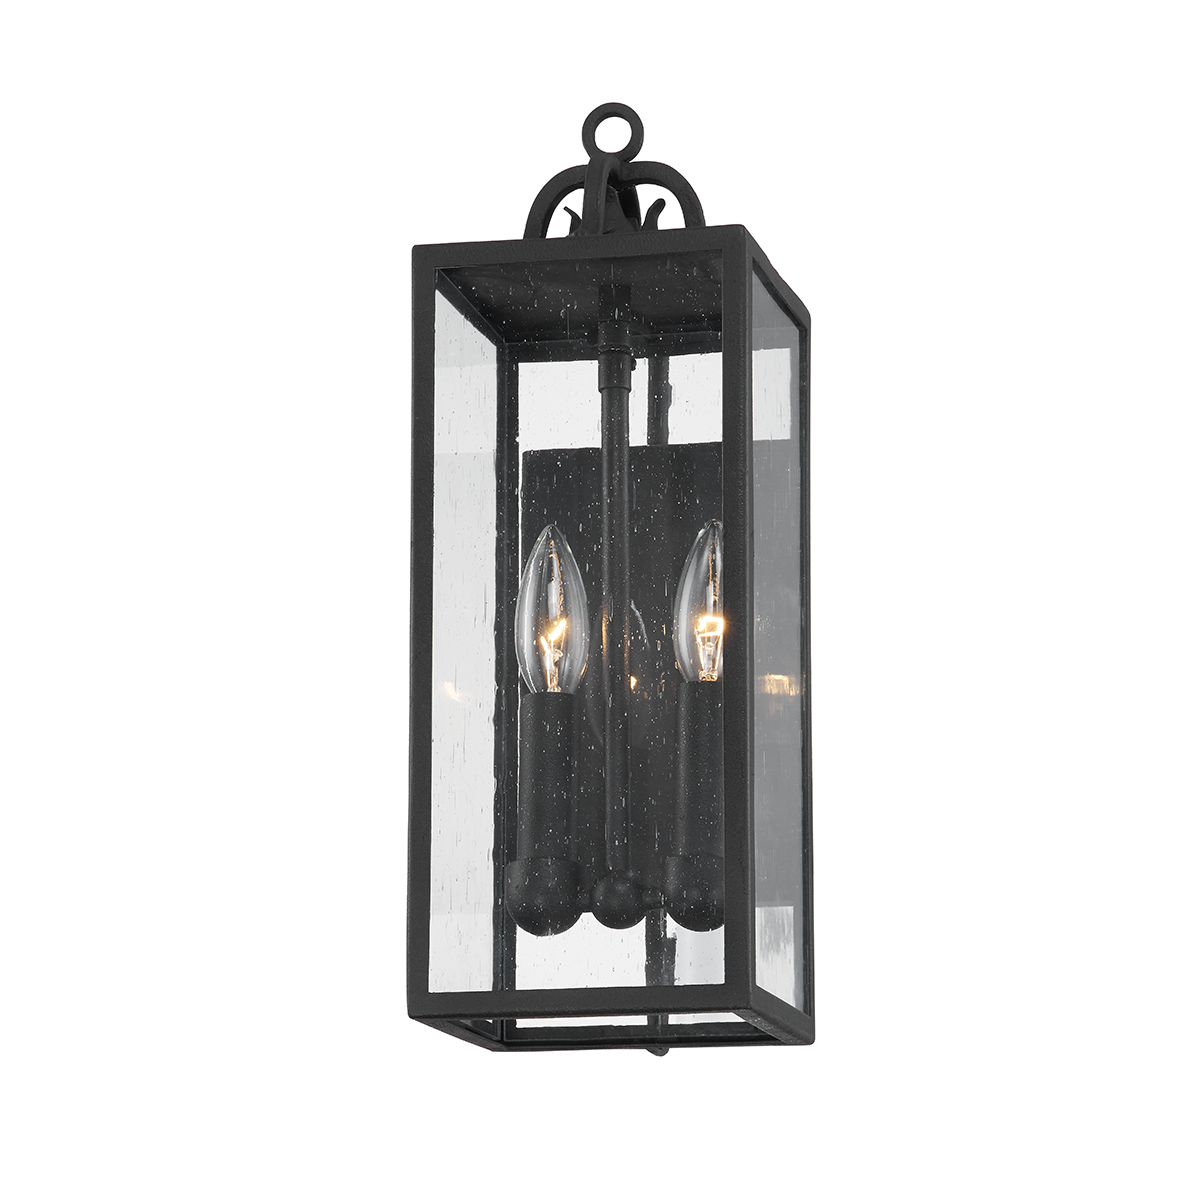 Troy CAIDEN 2 LIGHT EXTERIOR WALL SCONCE B2061 Outdoor l Wall Troy Lighting FORGED IRON  